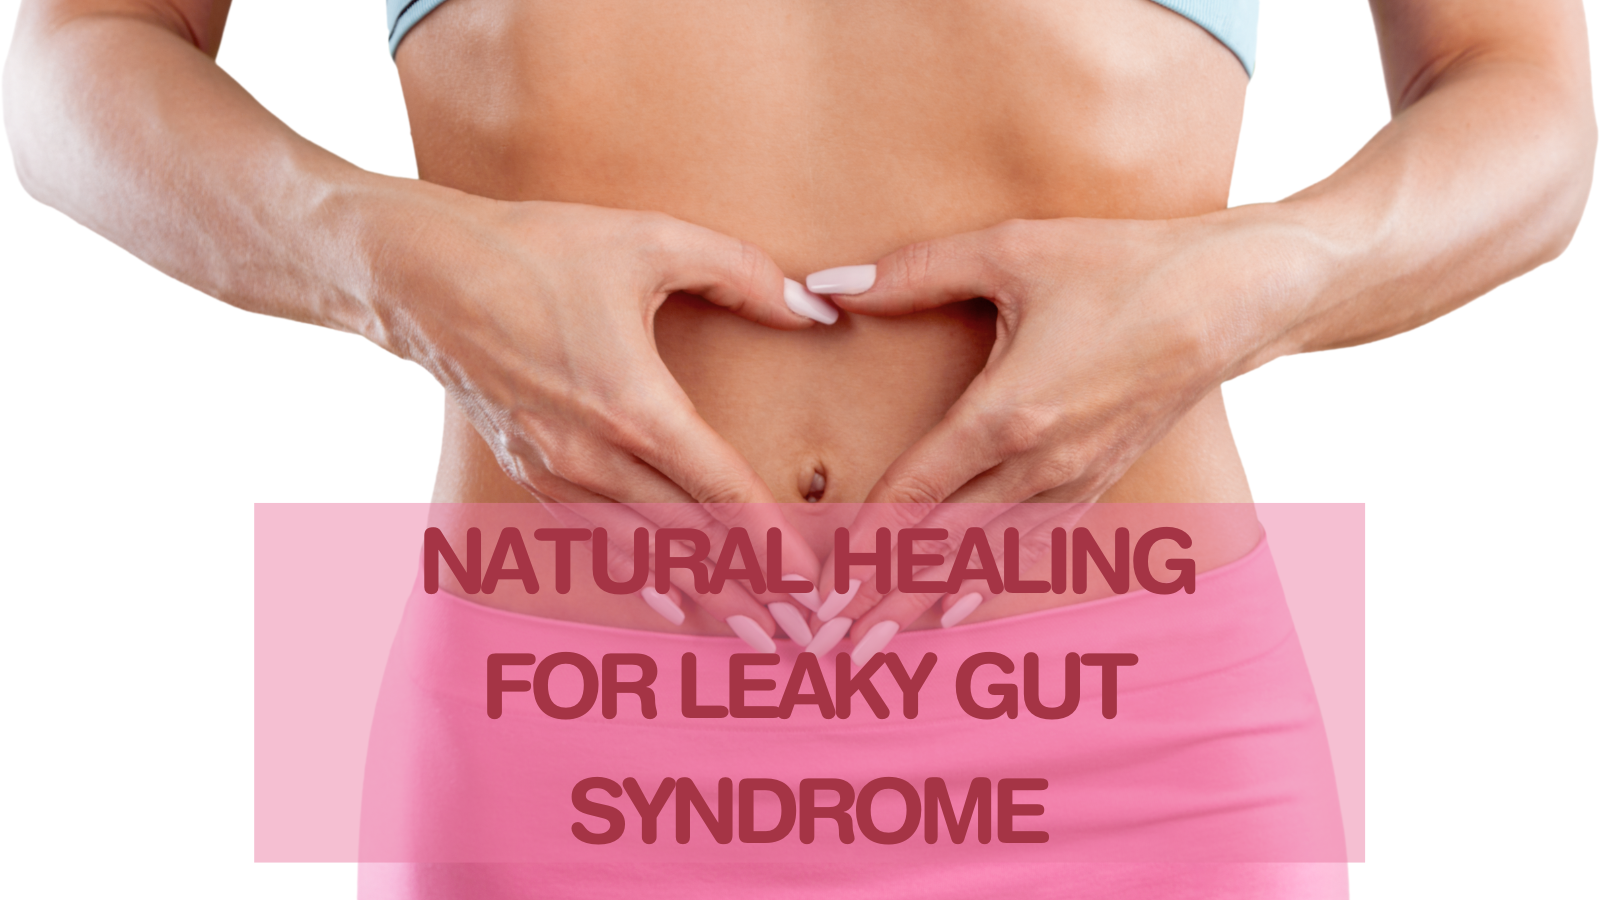 Natural Healing For Leaky Gut Syndrome